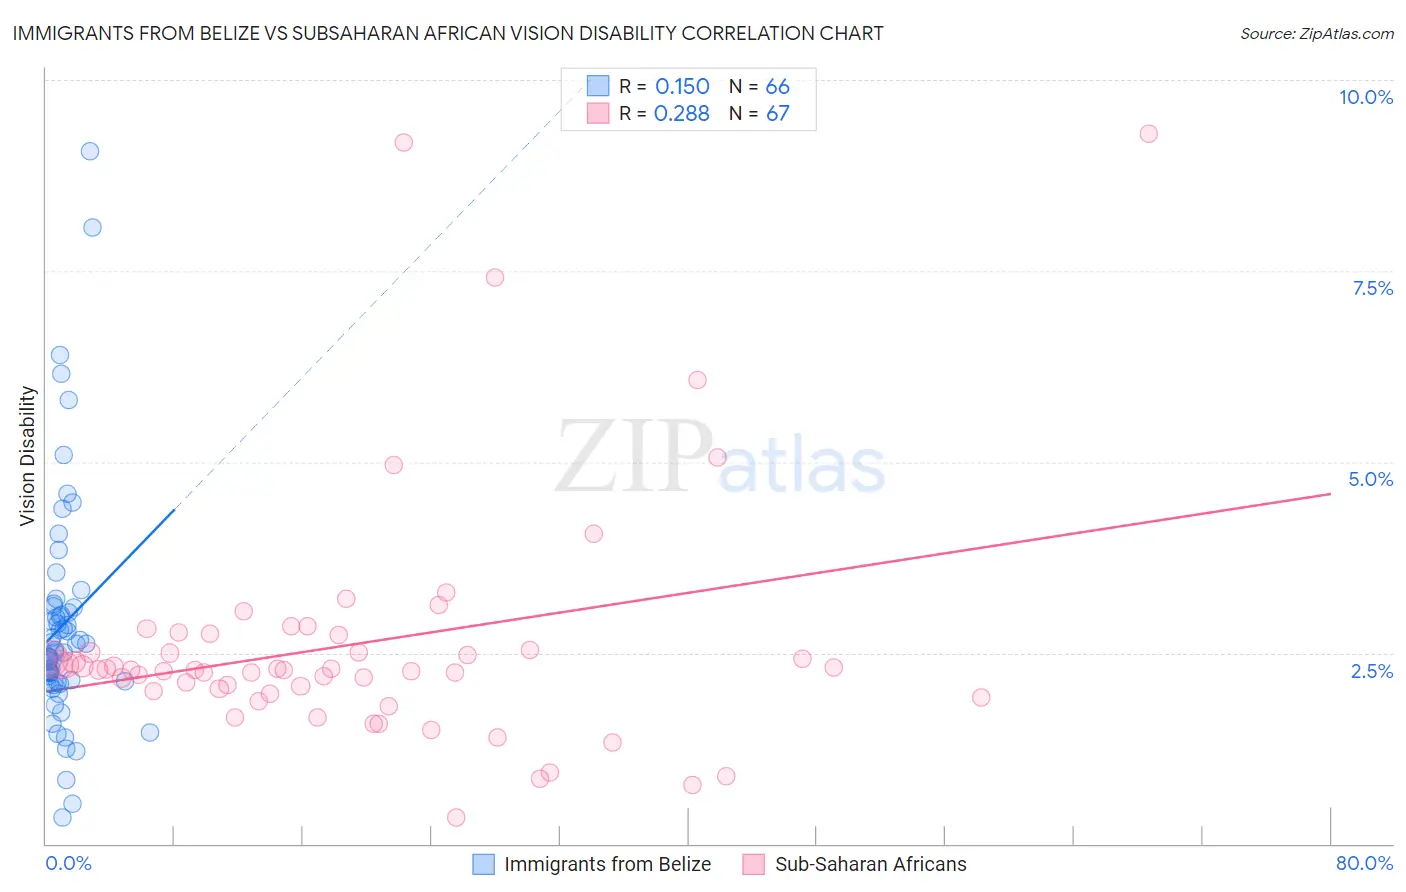 Immigrants from Belize vs Subsaharan African Vision Disability